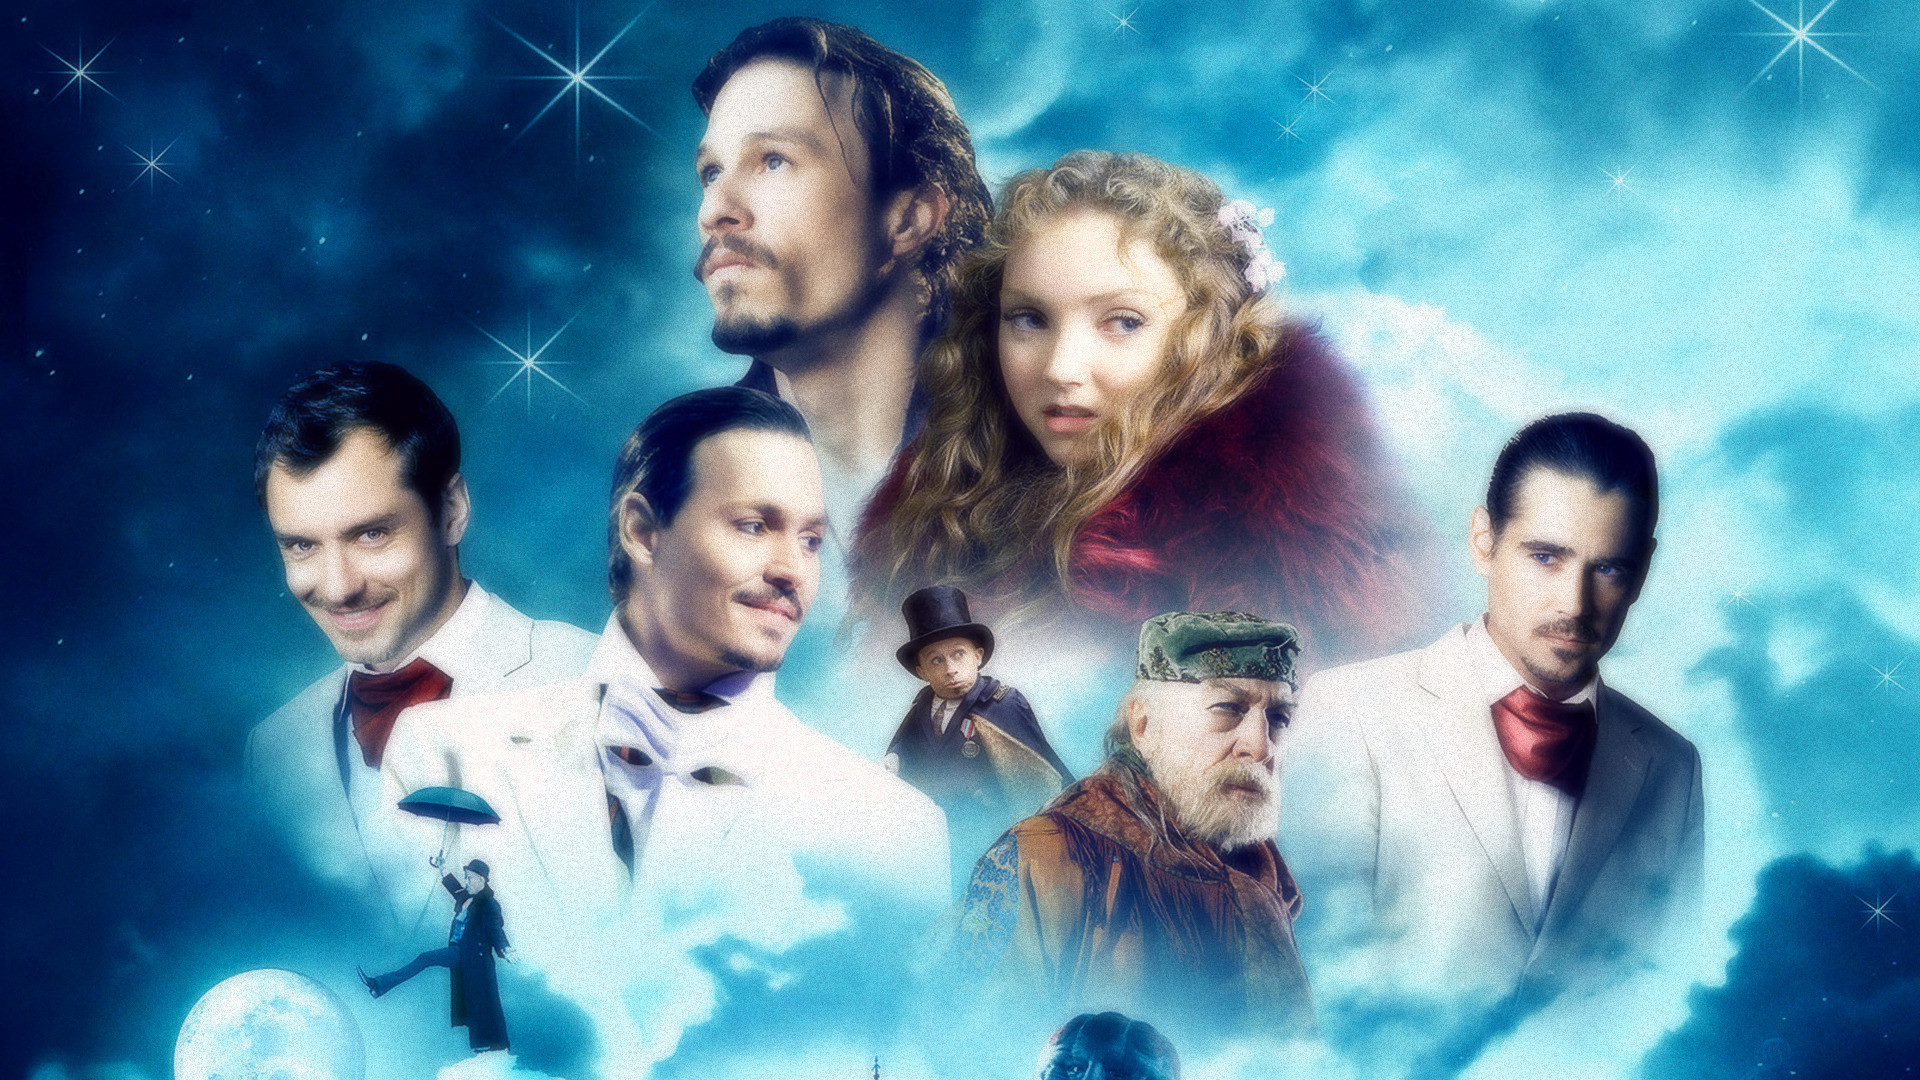 Movie Wallpaper And Backdrops For The Imaginarium Of Doctor Parnassus